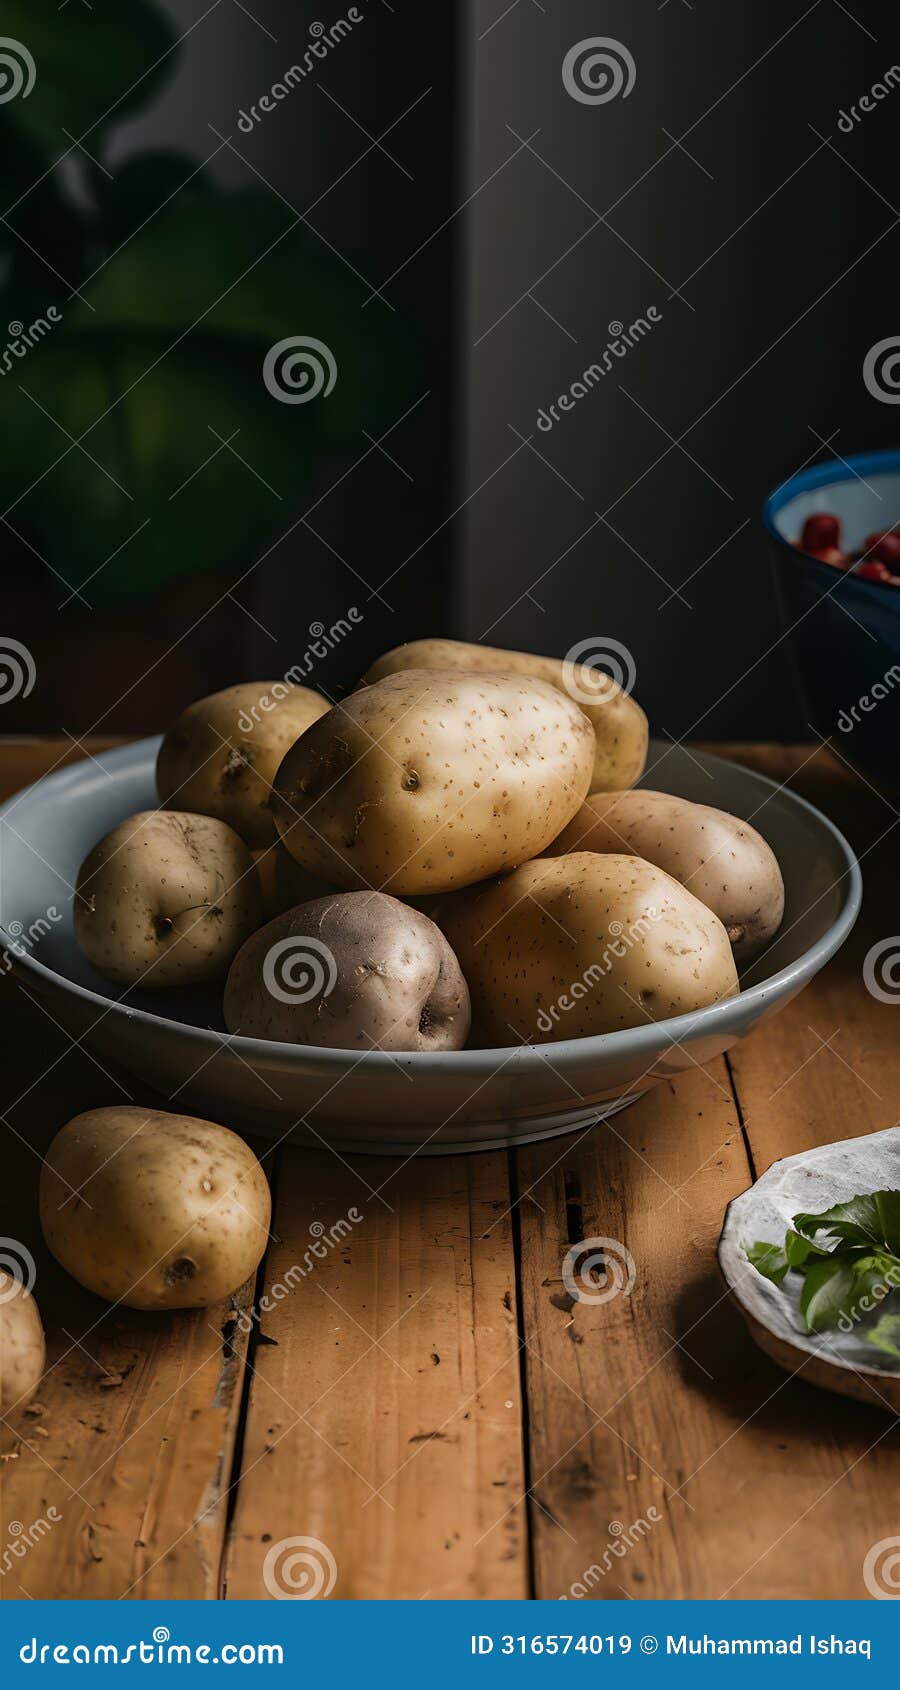 fresh and versatile potatoes showcased on indoor kitchen table